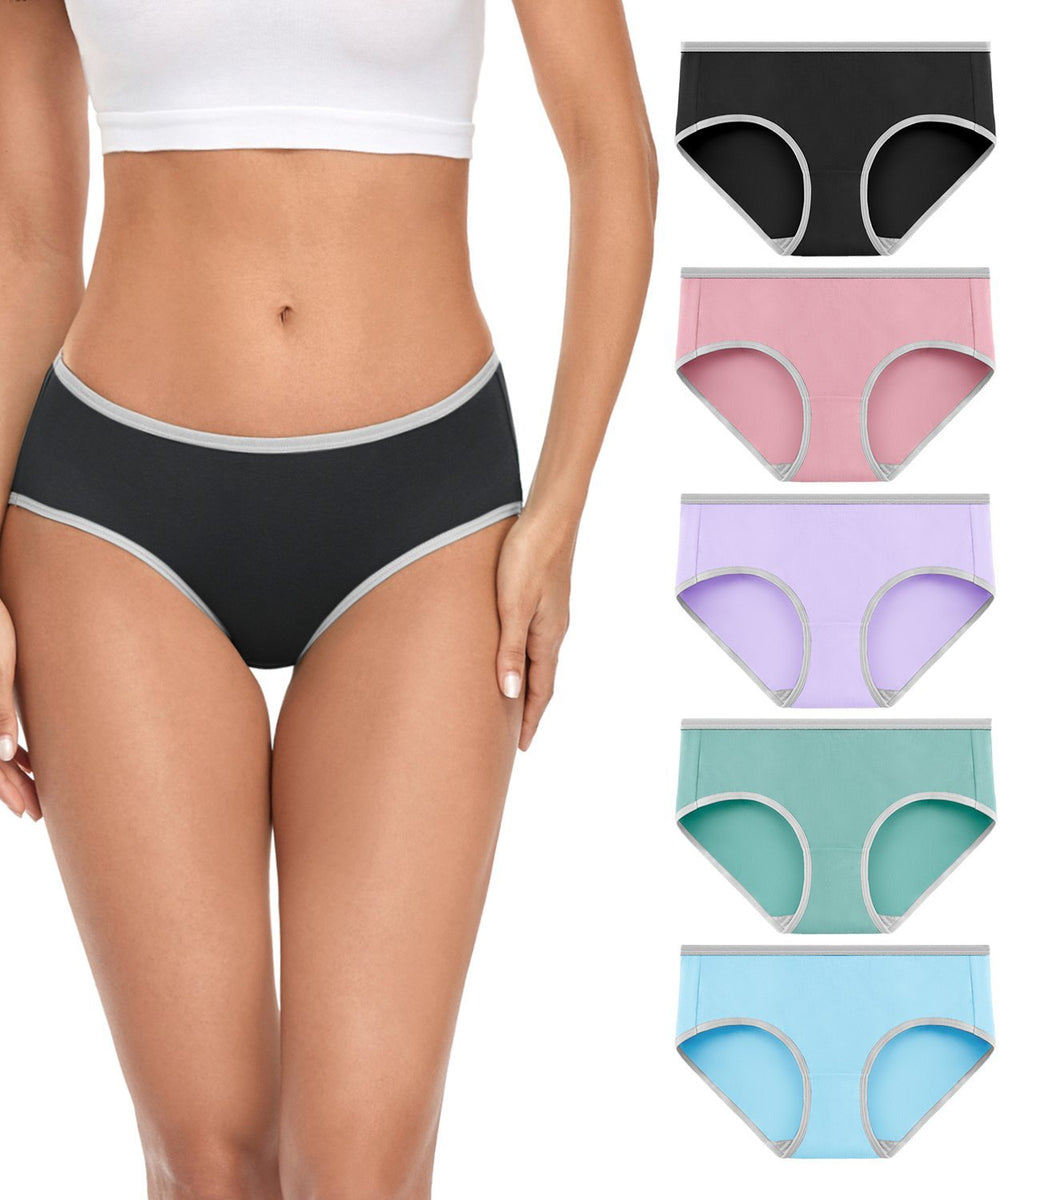 wirarpa Women’s Mid Low Rise Cotton Brief Panties 5 Pack